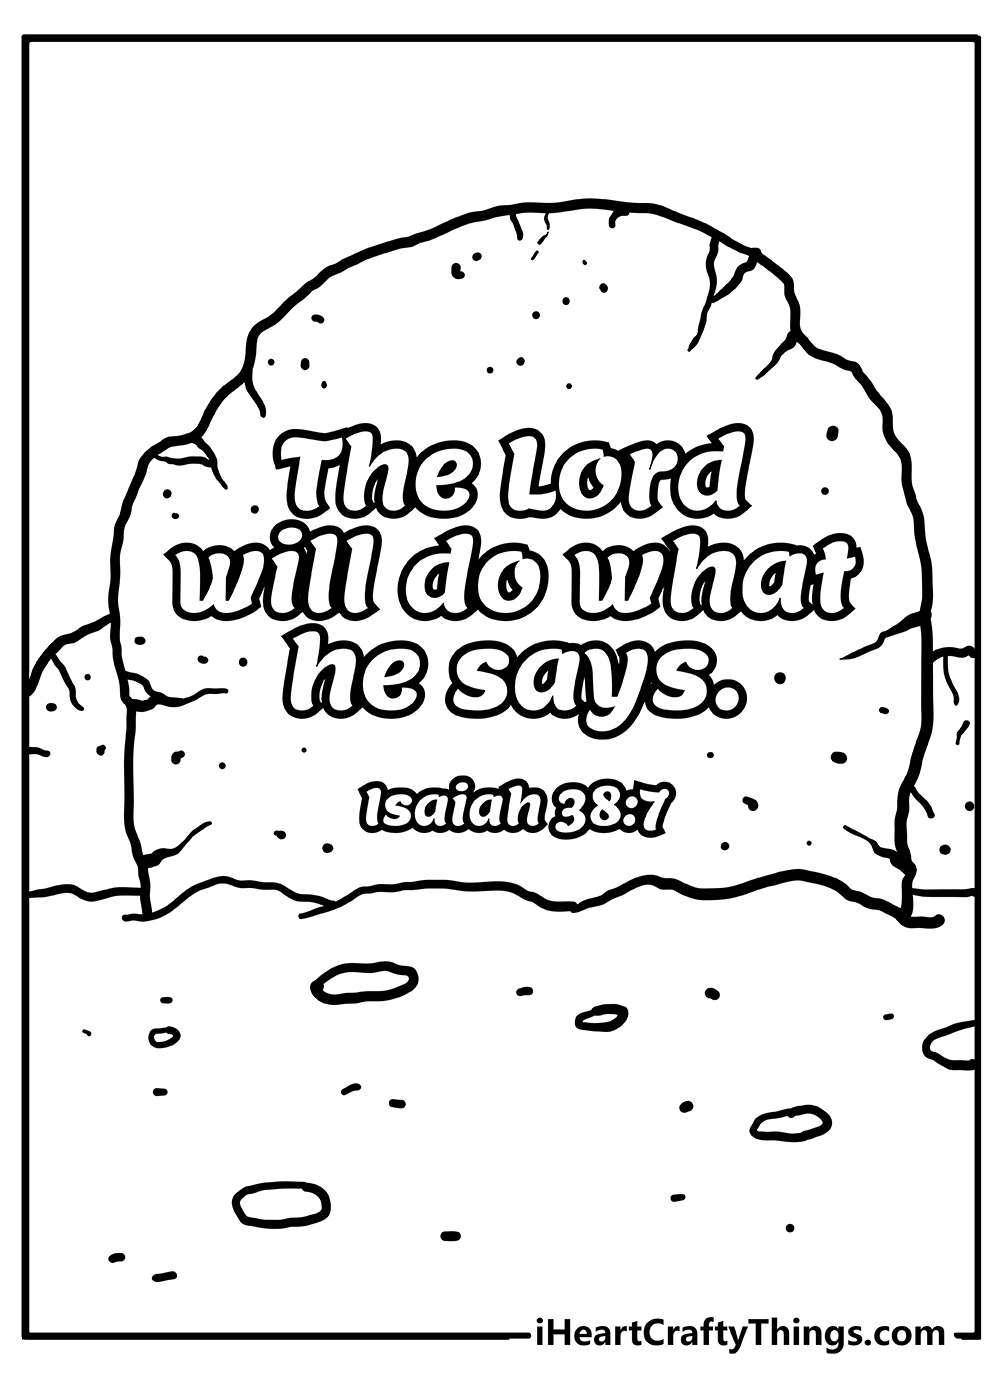 Bible Verse Coloring Pages for kids free download